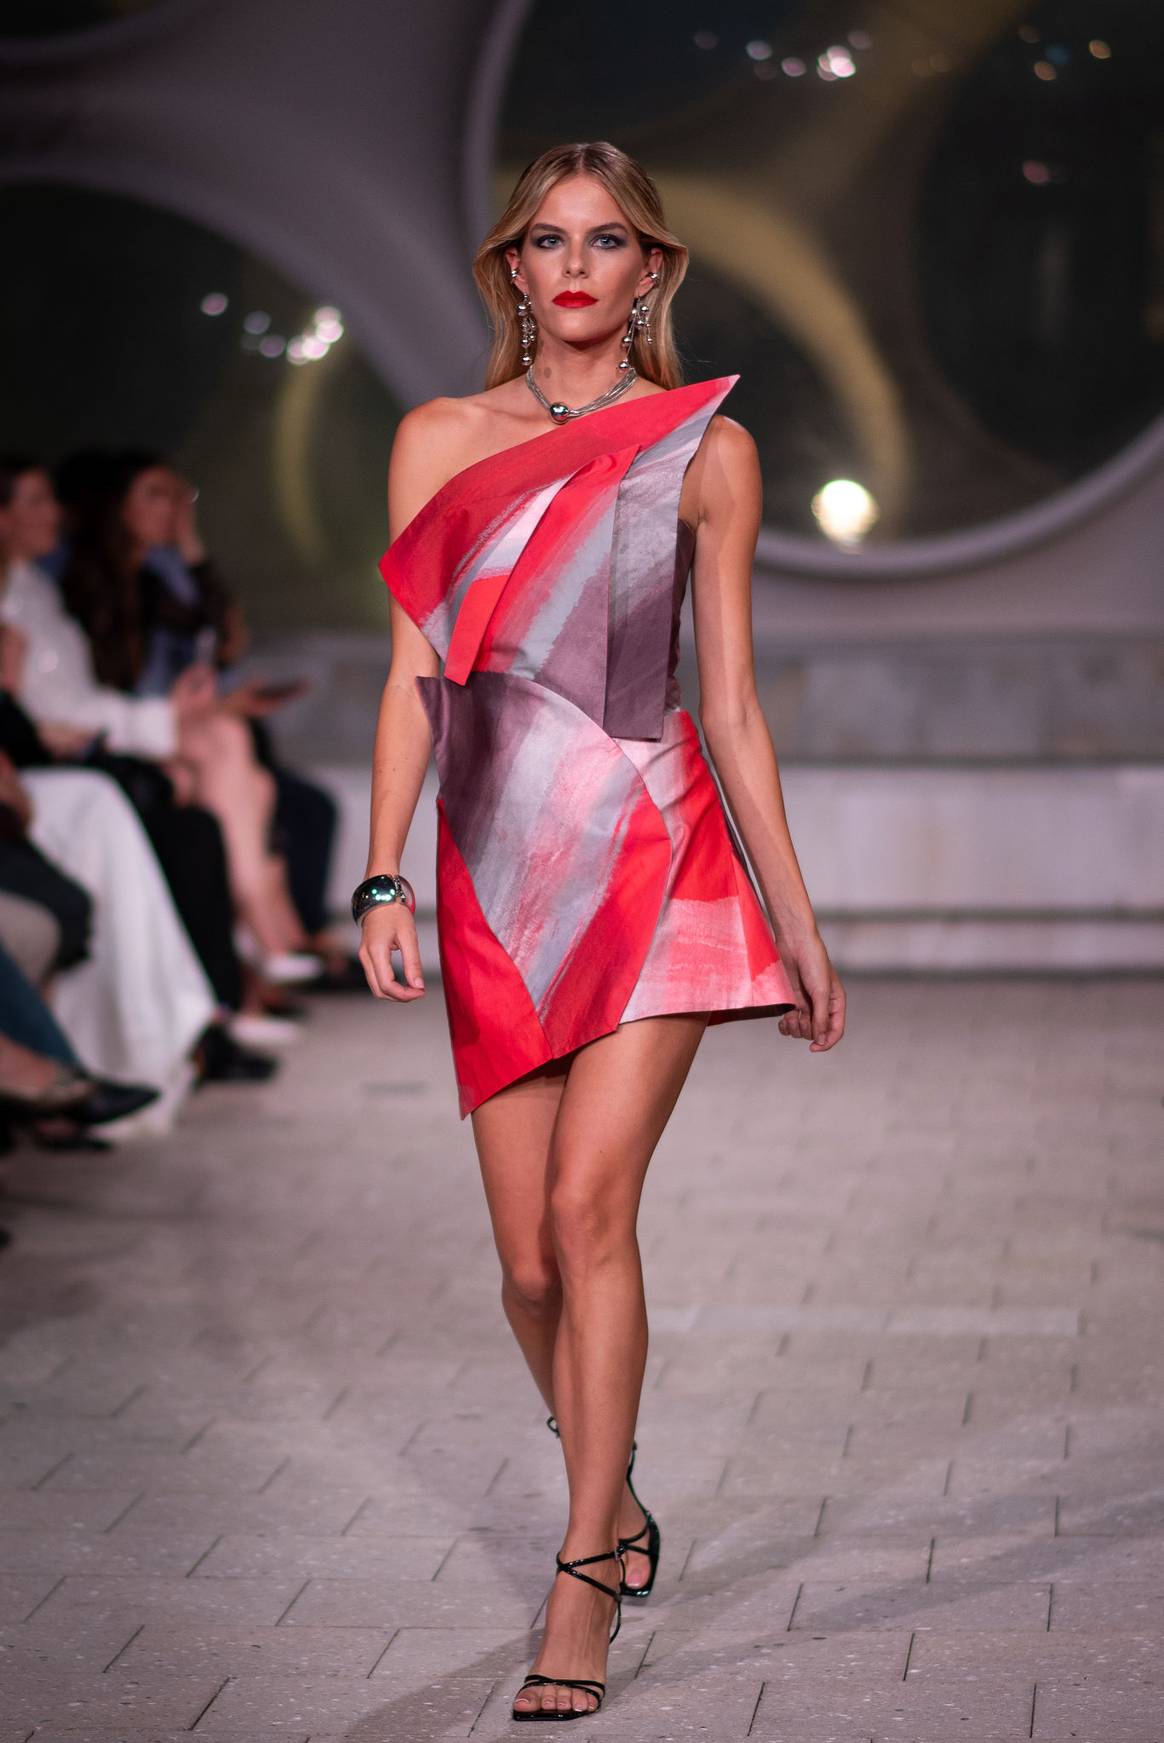 A look by Daniel Uribe at the Istituto Marangoni inaugural student fashion show, May 2024.